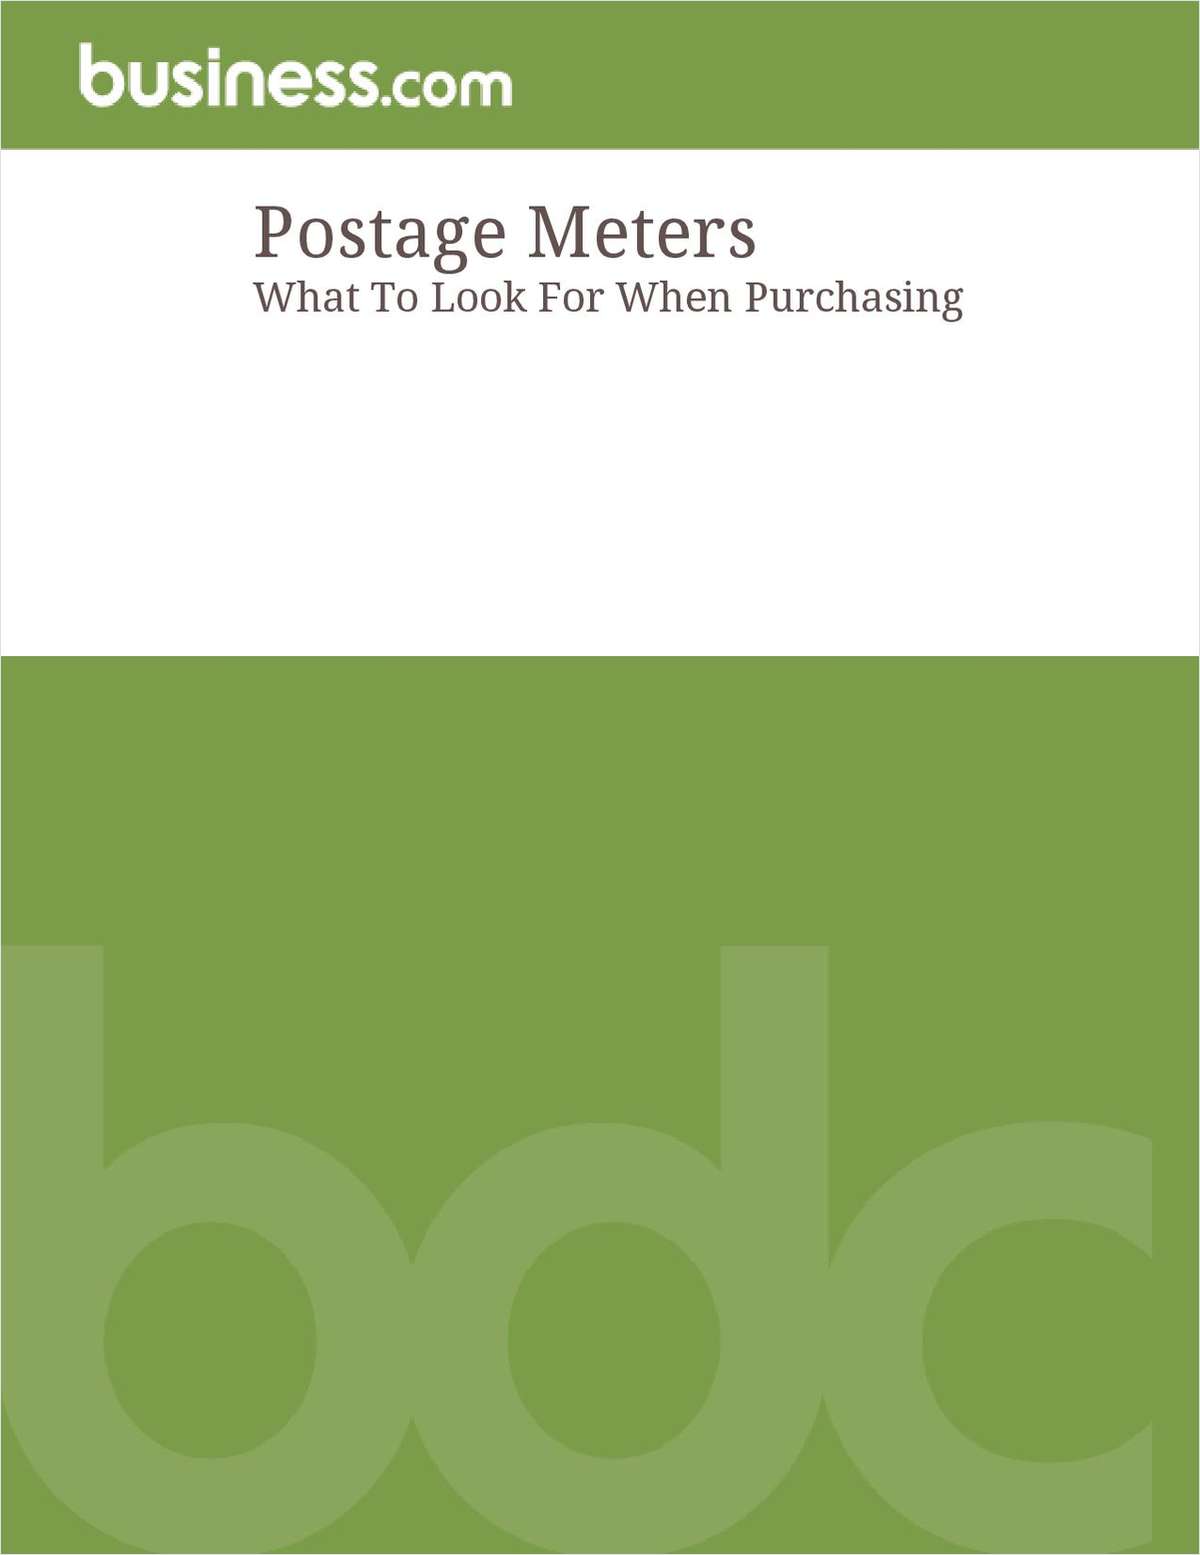 What To Look For When Purchasing A Postage Meter